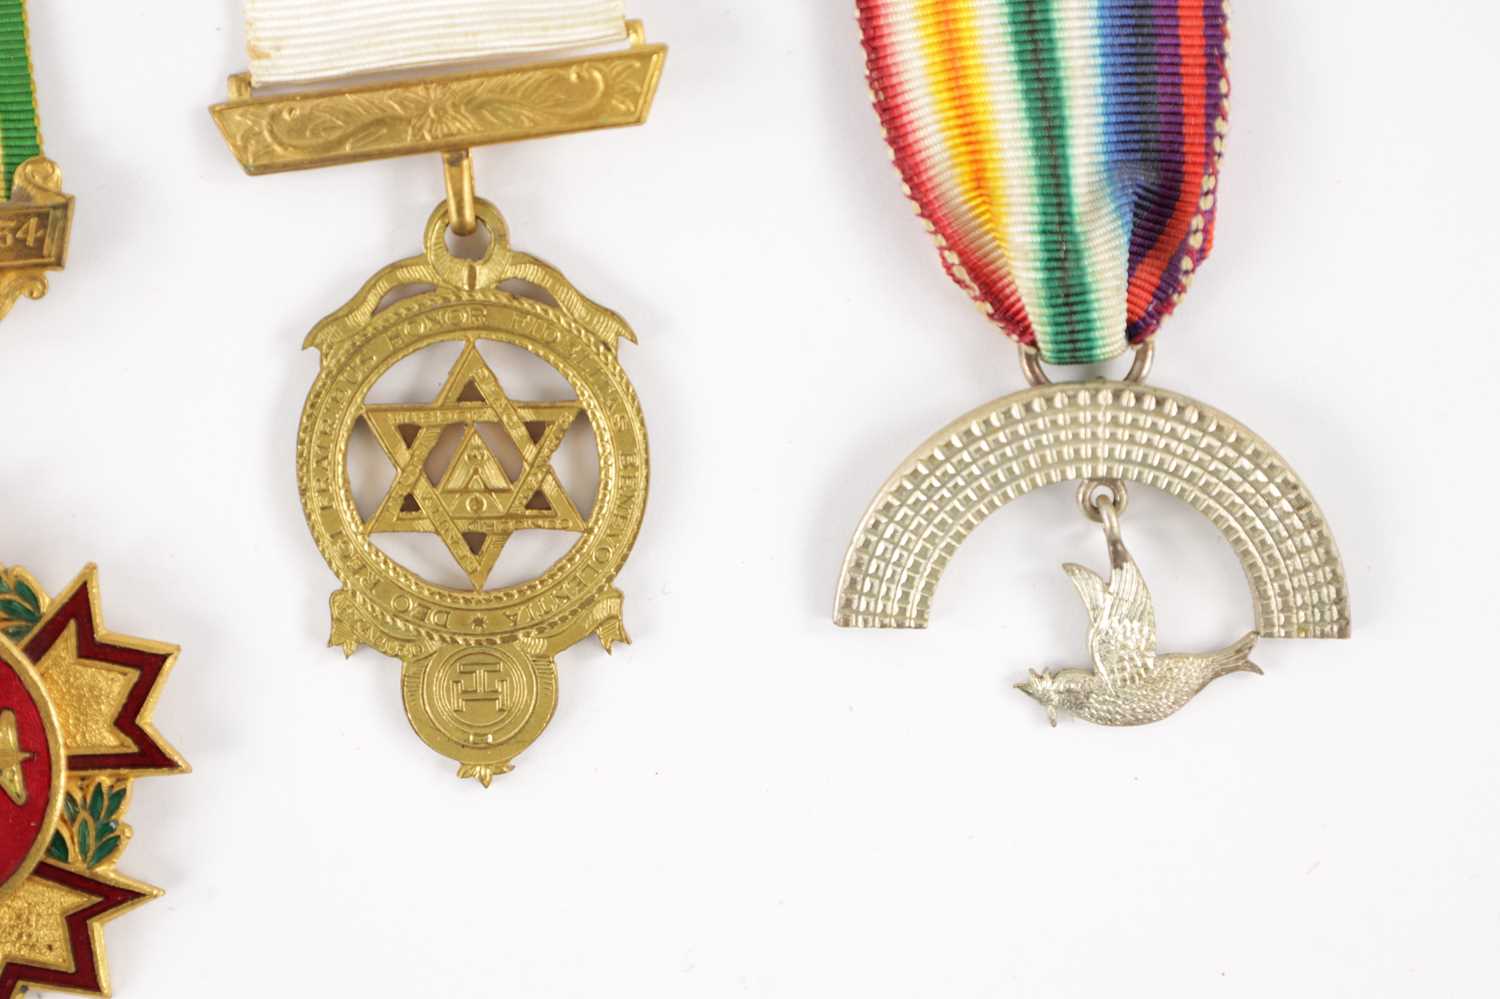 A COLLECTION OF MASONIC AND ORDER OF THE BUFFALOES MEDALS - Image 4 of 8